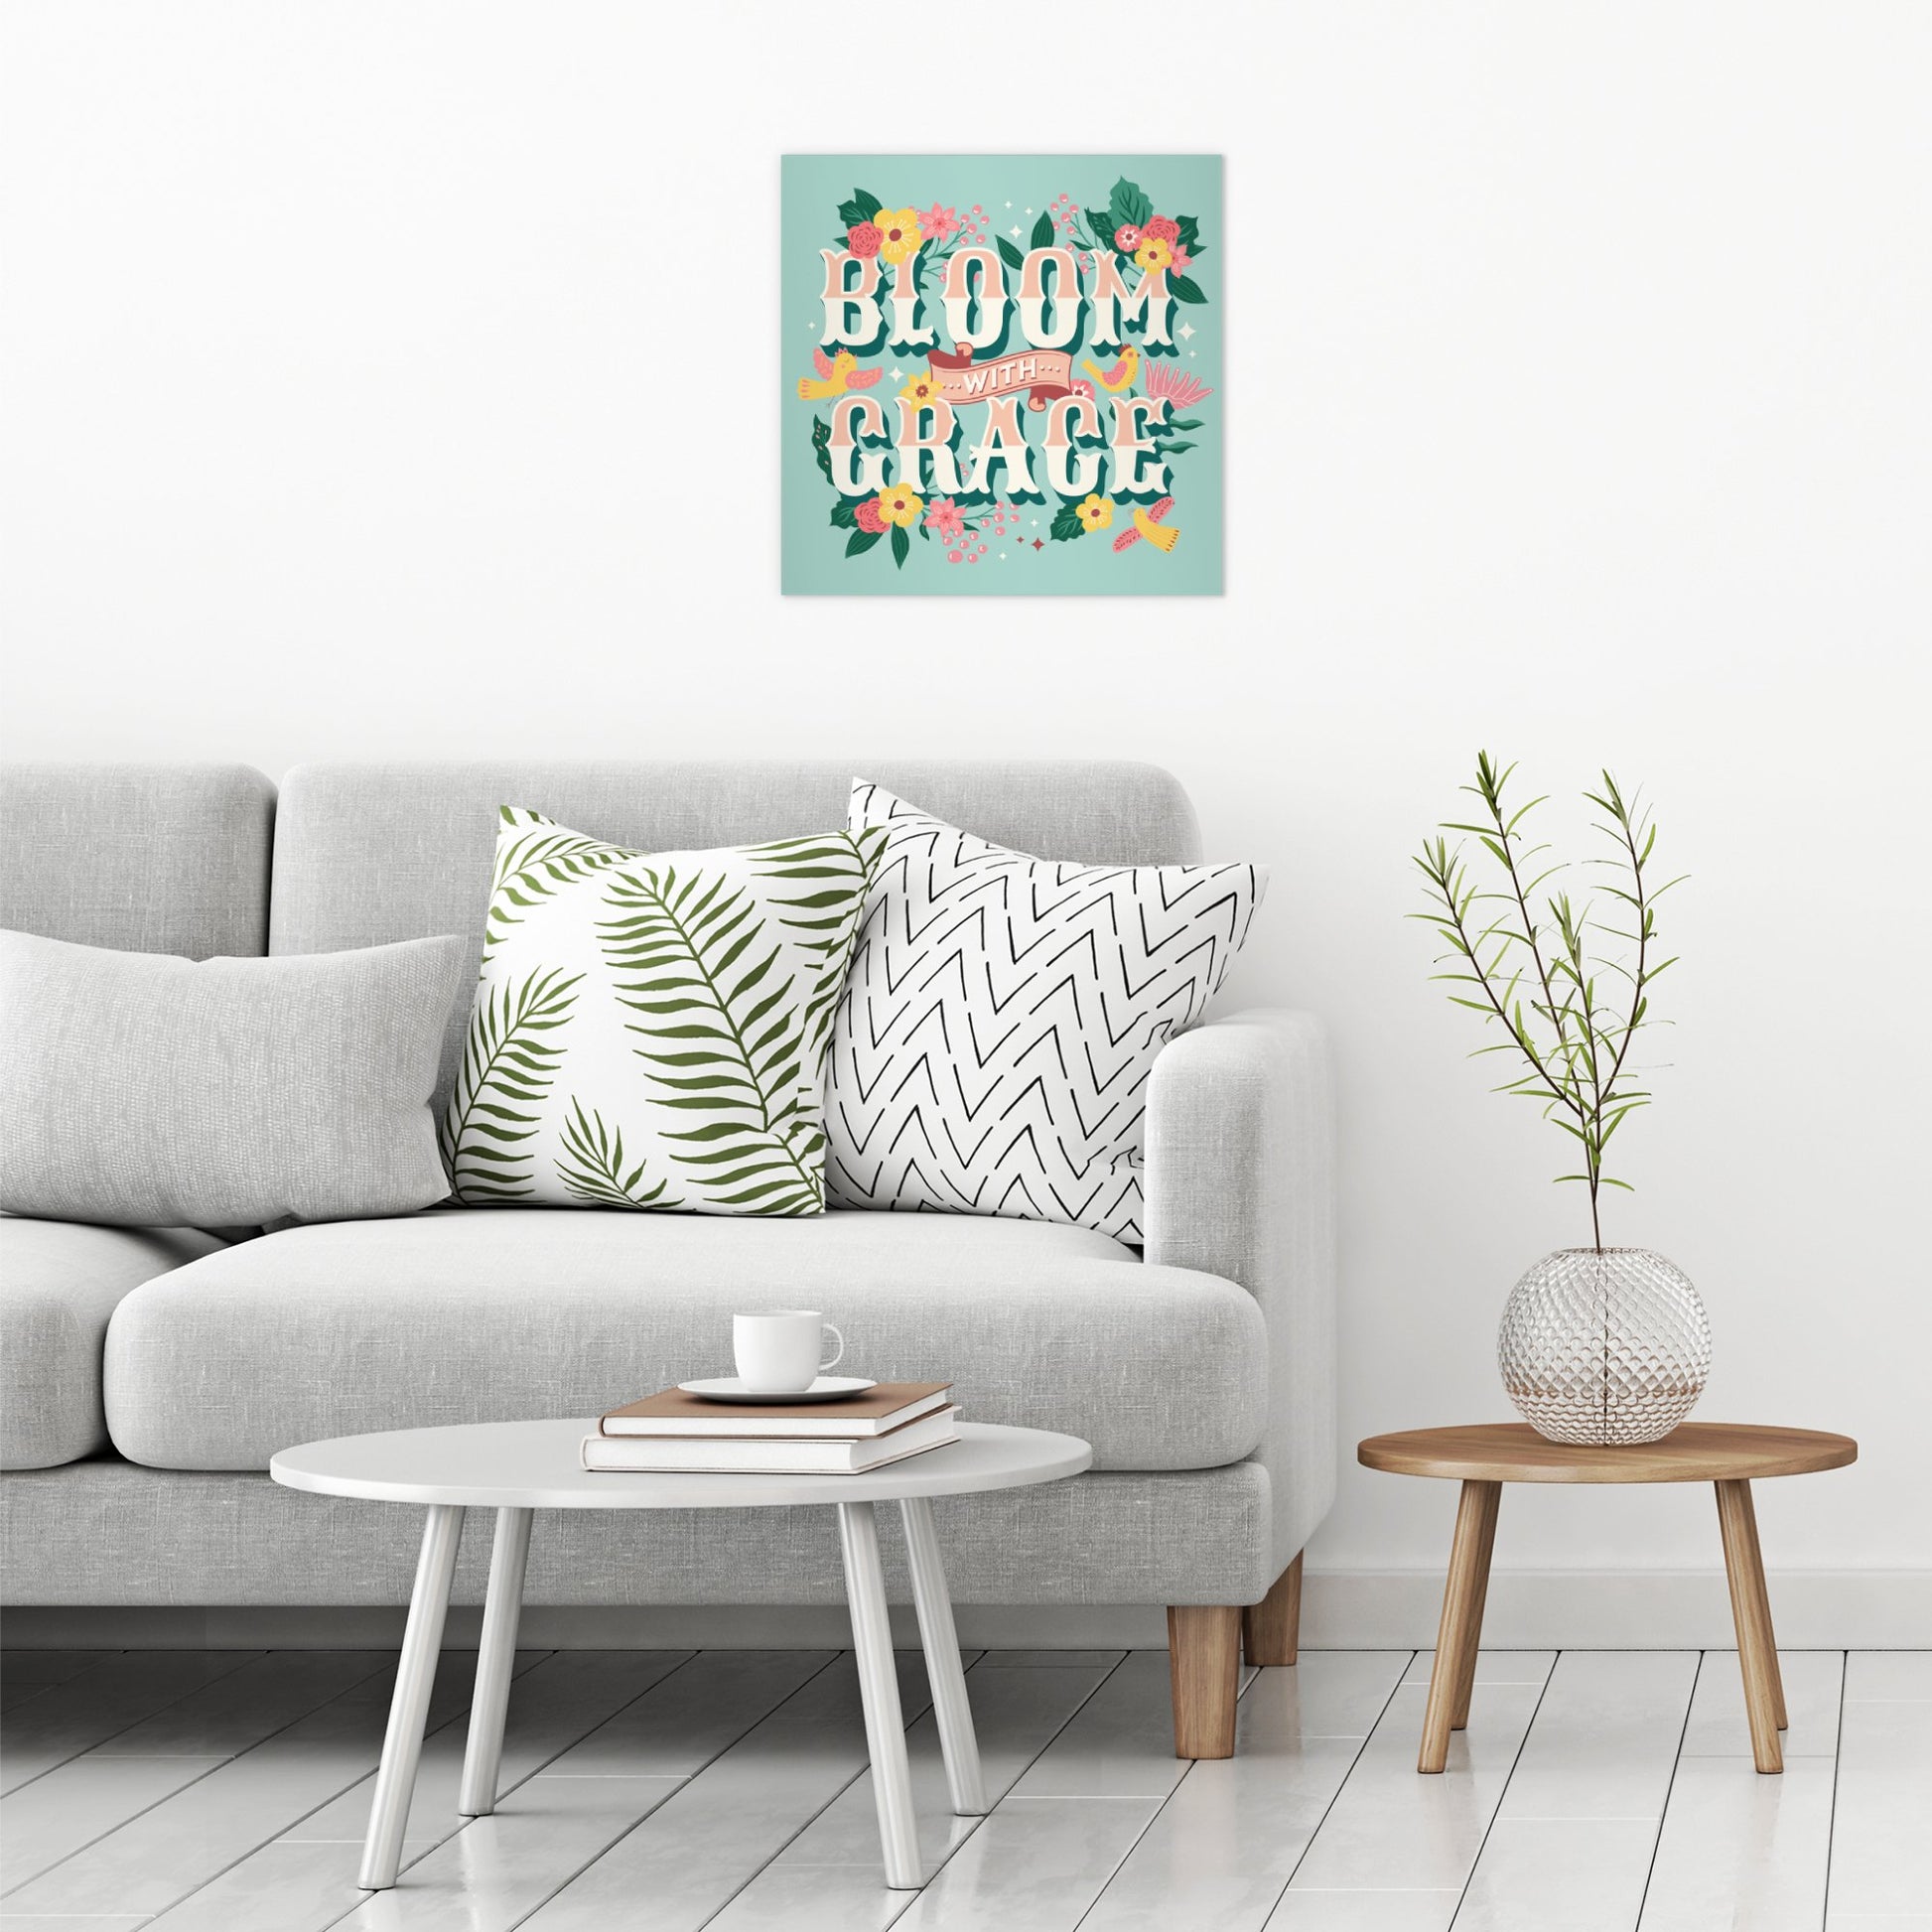 A contemporary modern room view showing a large size metal art poster display plate with printed design of a Bloom with Grace Inspirational Quote